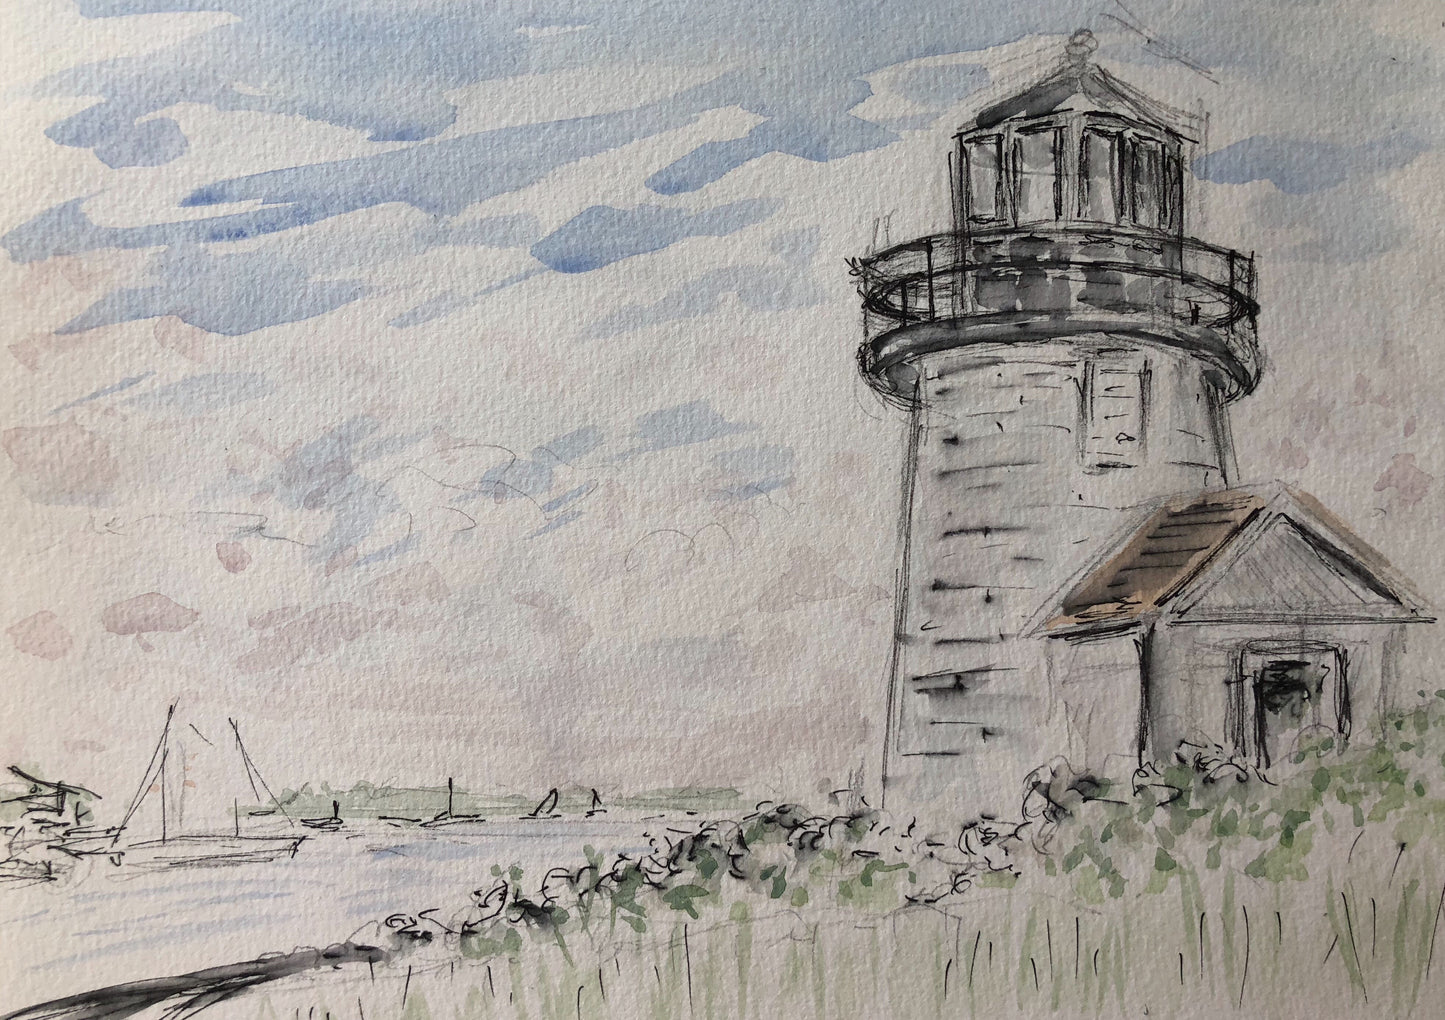 Hyannis Harbour Lighthouse, Cape Cod - SOLD